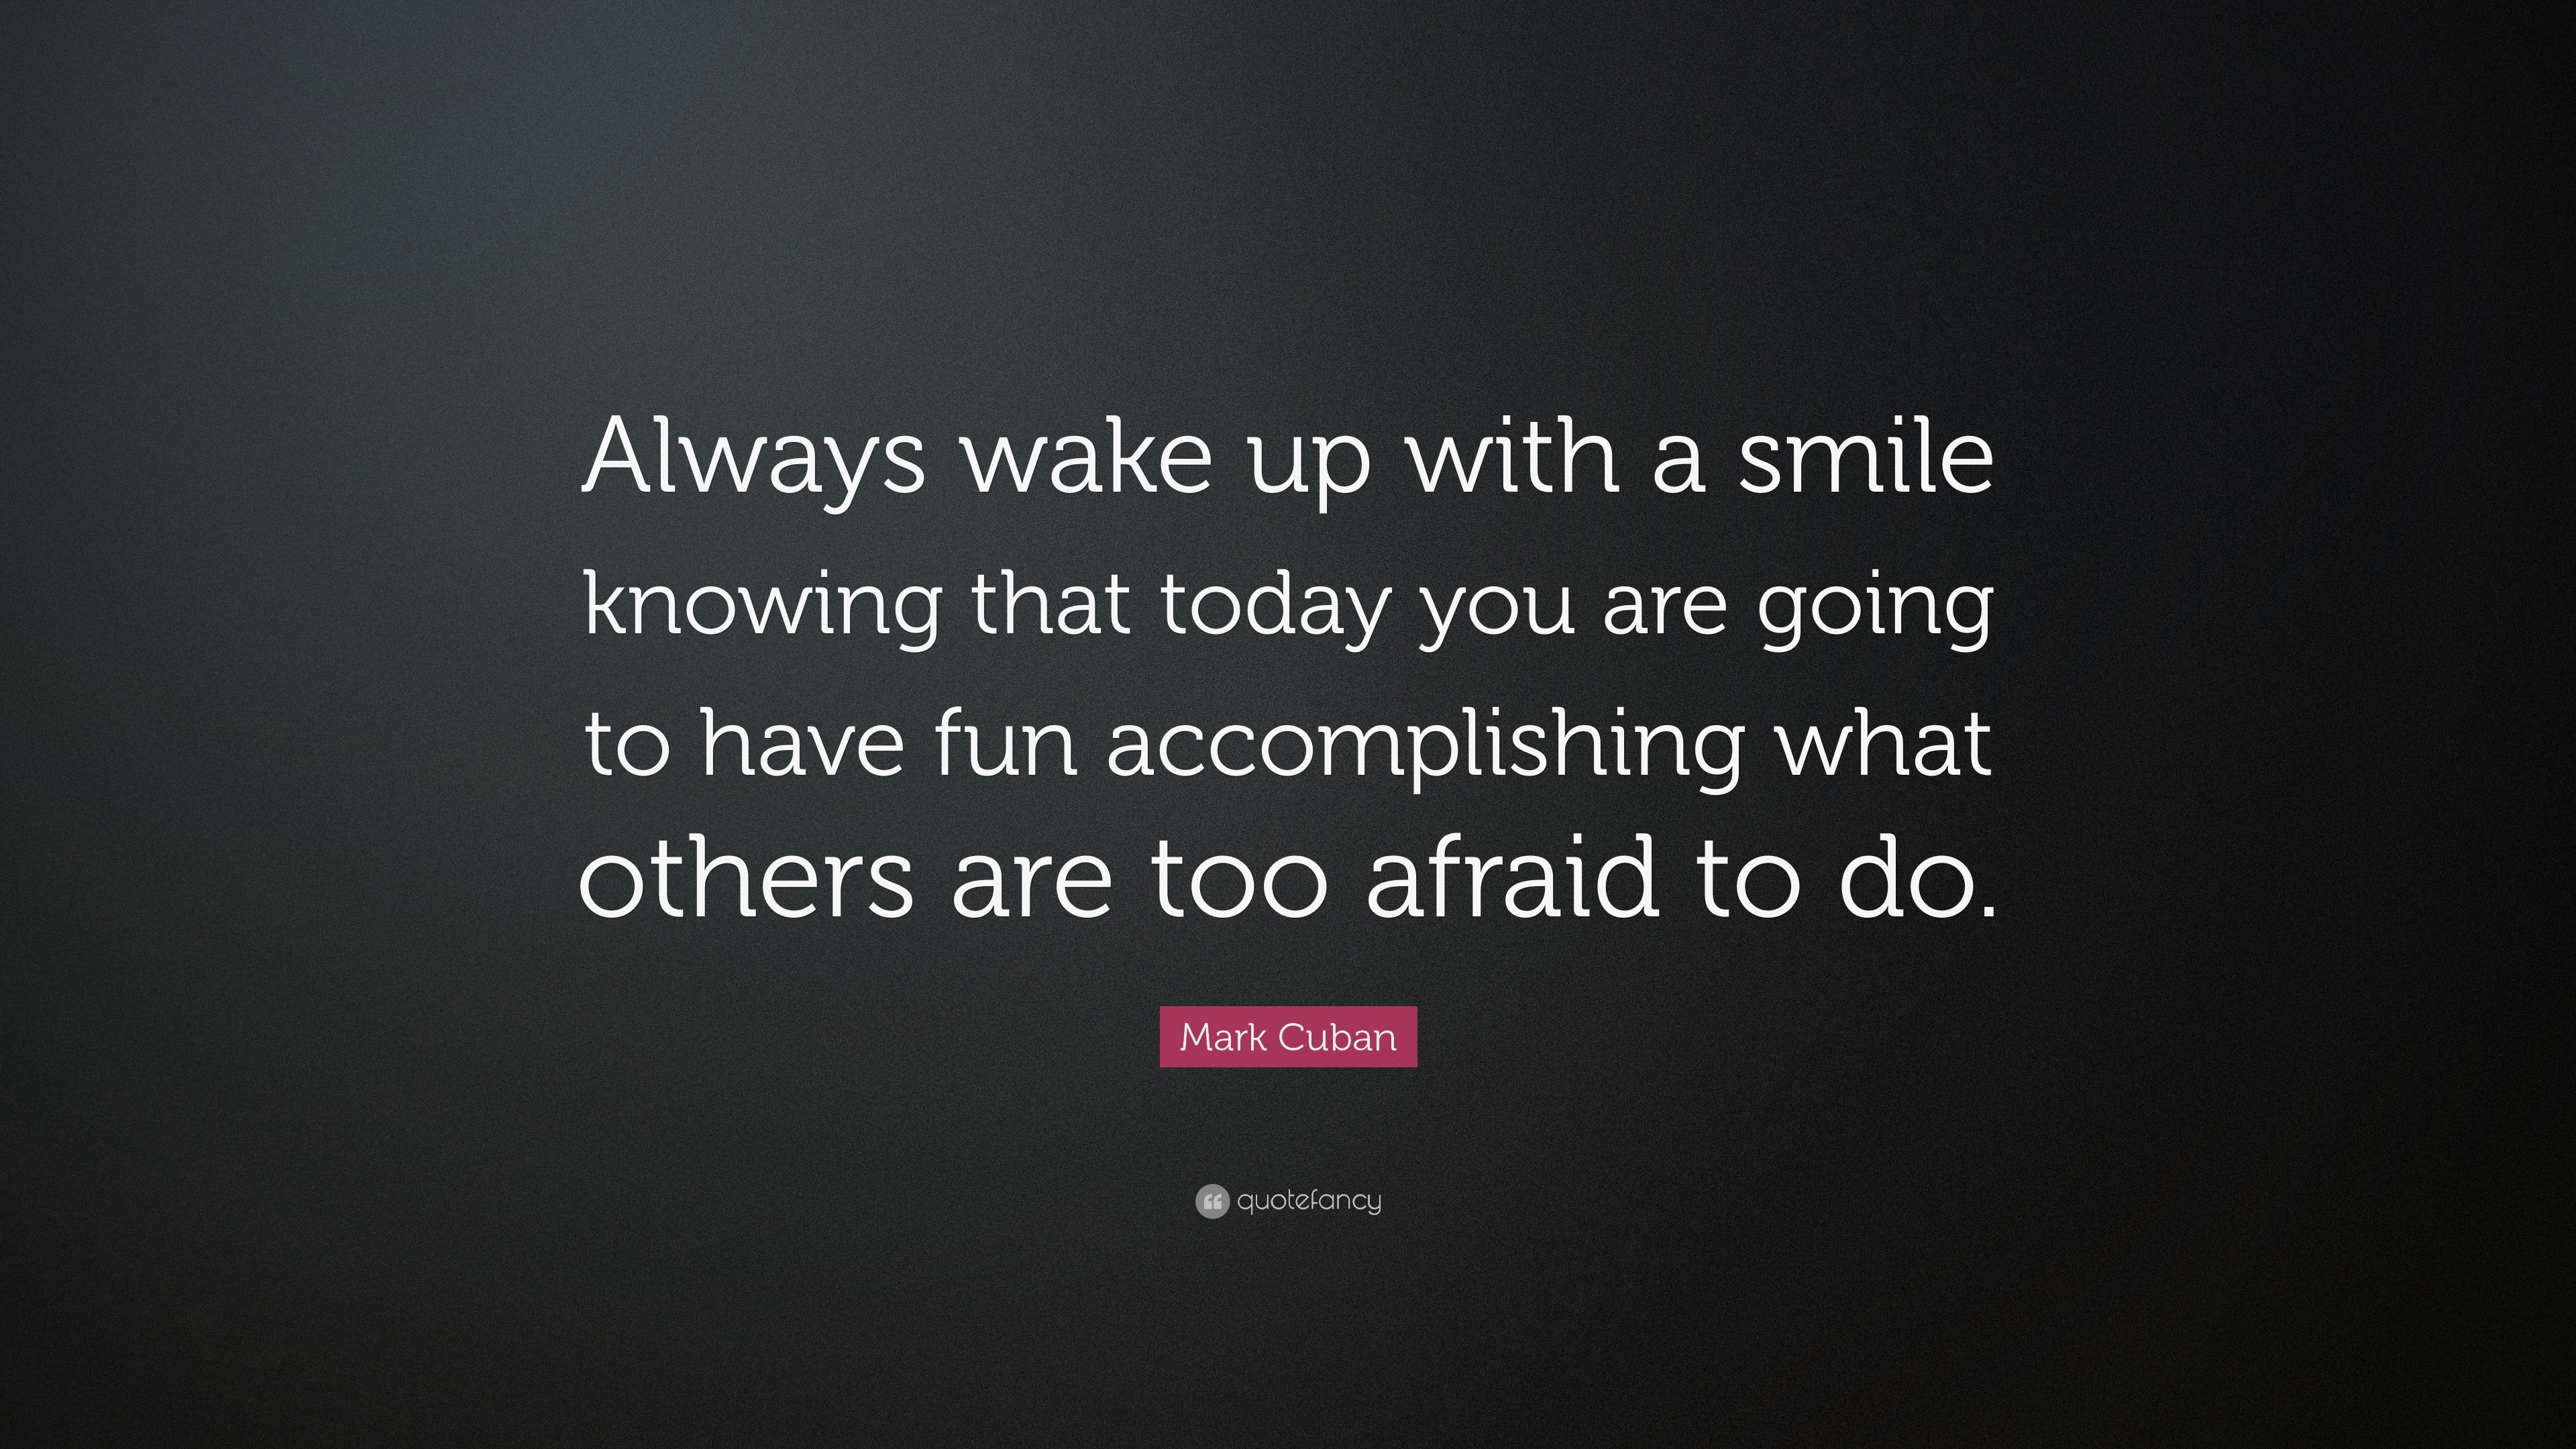 Mark Cuban Quote: “Always wake up with a smile knowing that today you ...